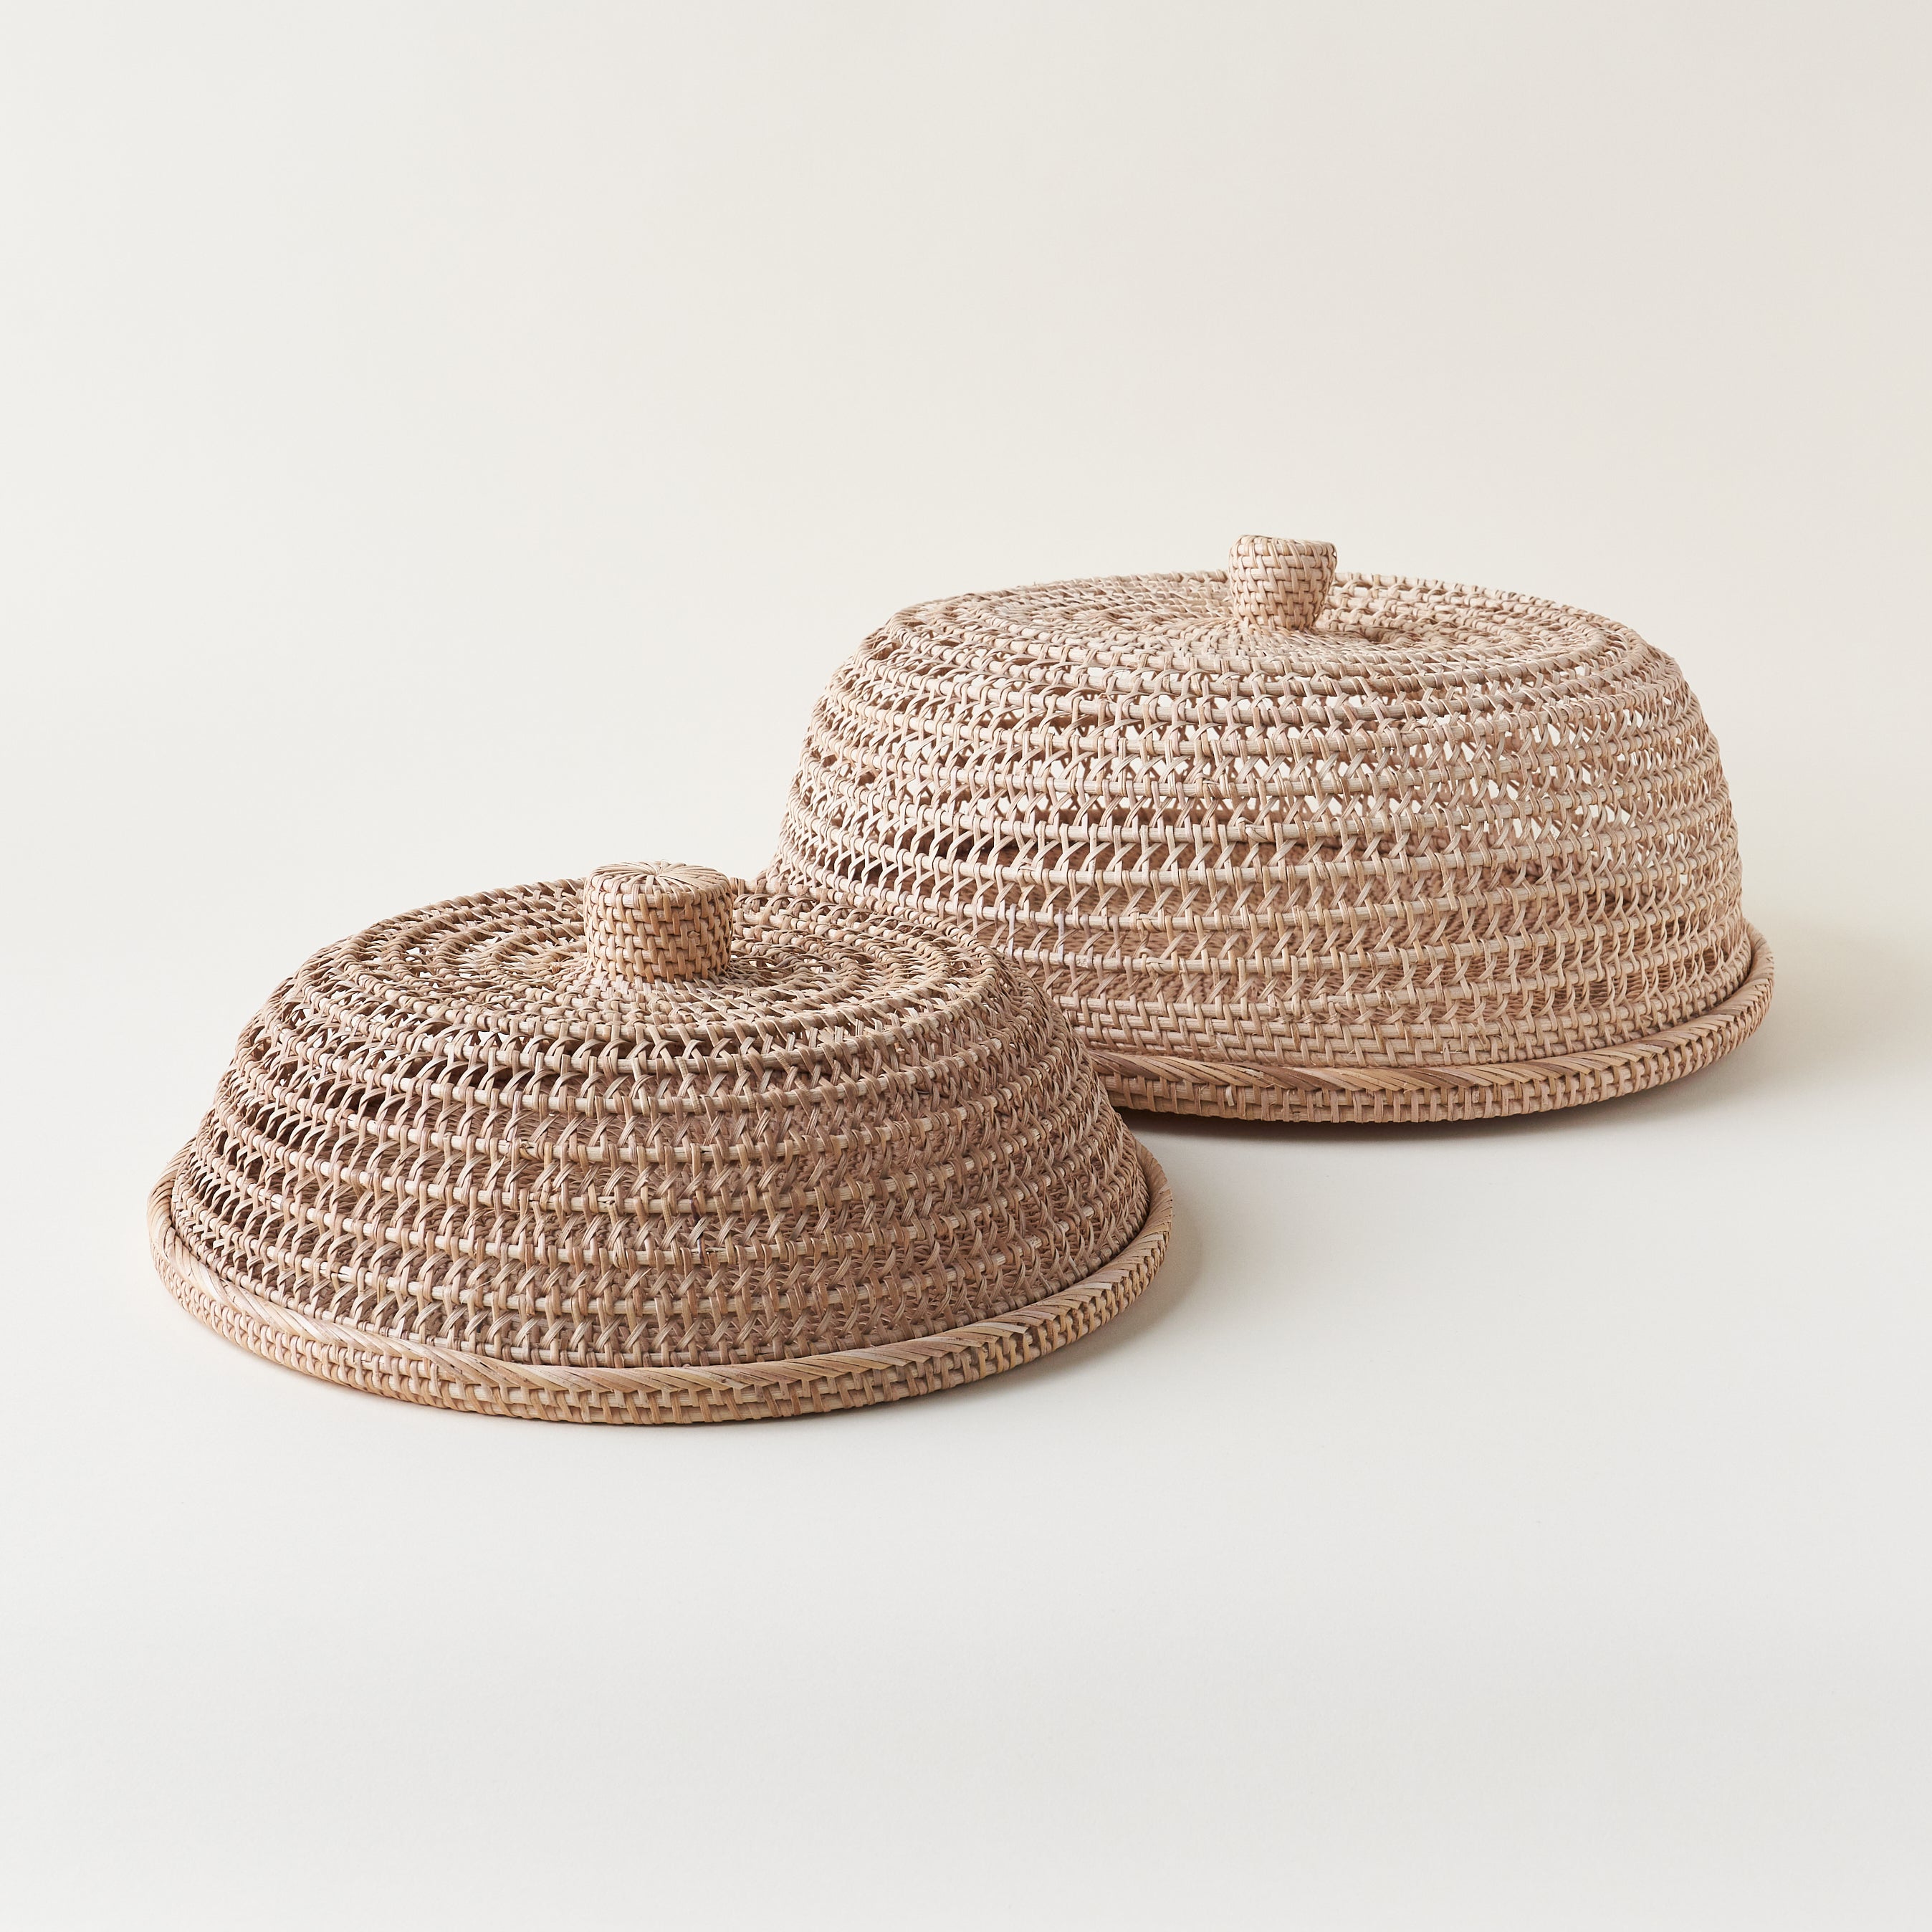 Hand-Woven Rattan Food Covers